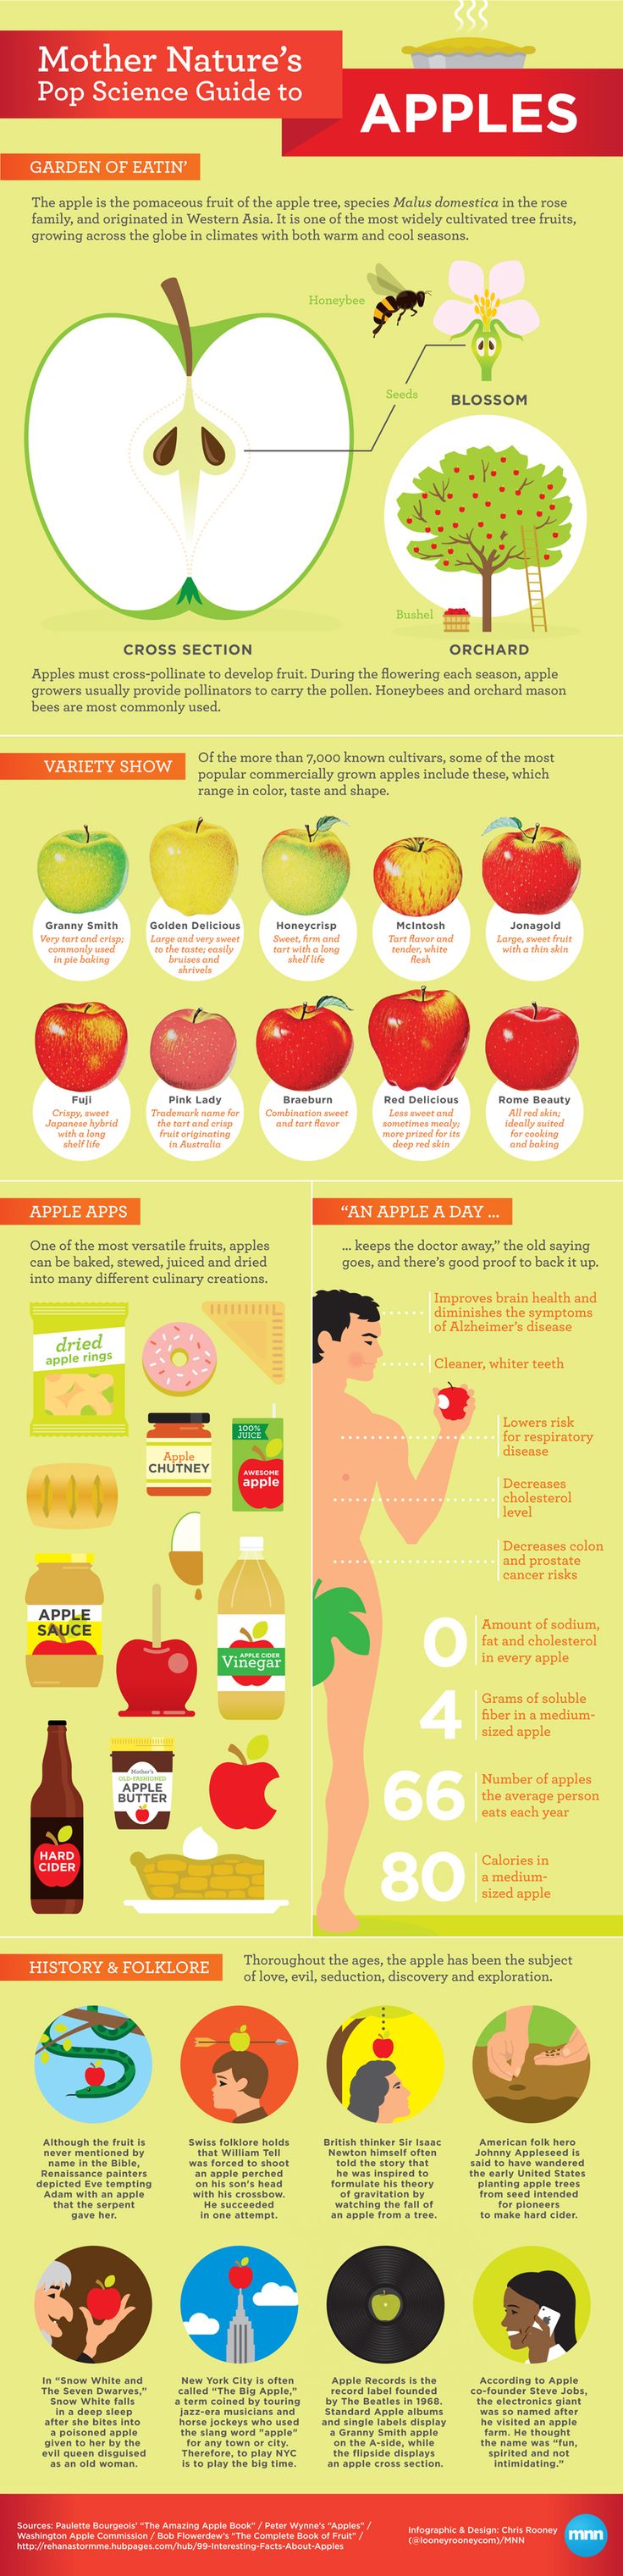 Mother Nature’s Pop Science Guide to Apples (Infographic)